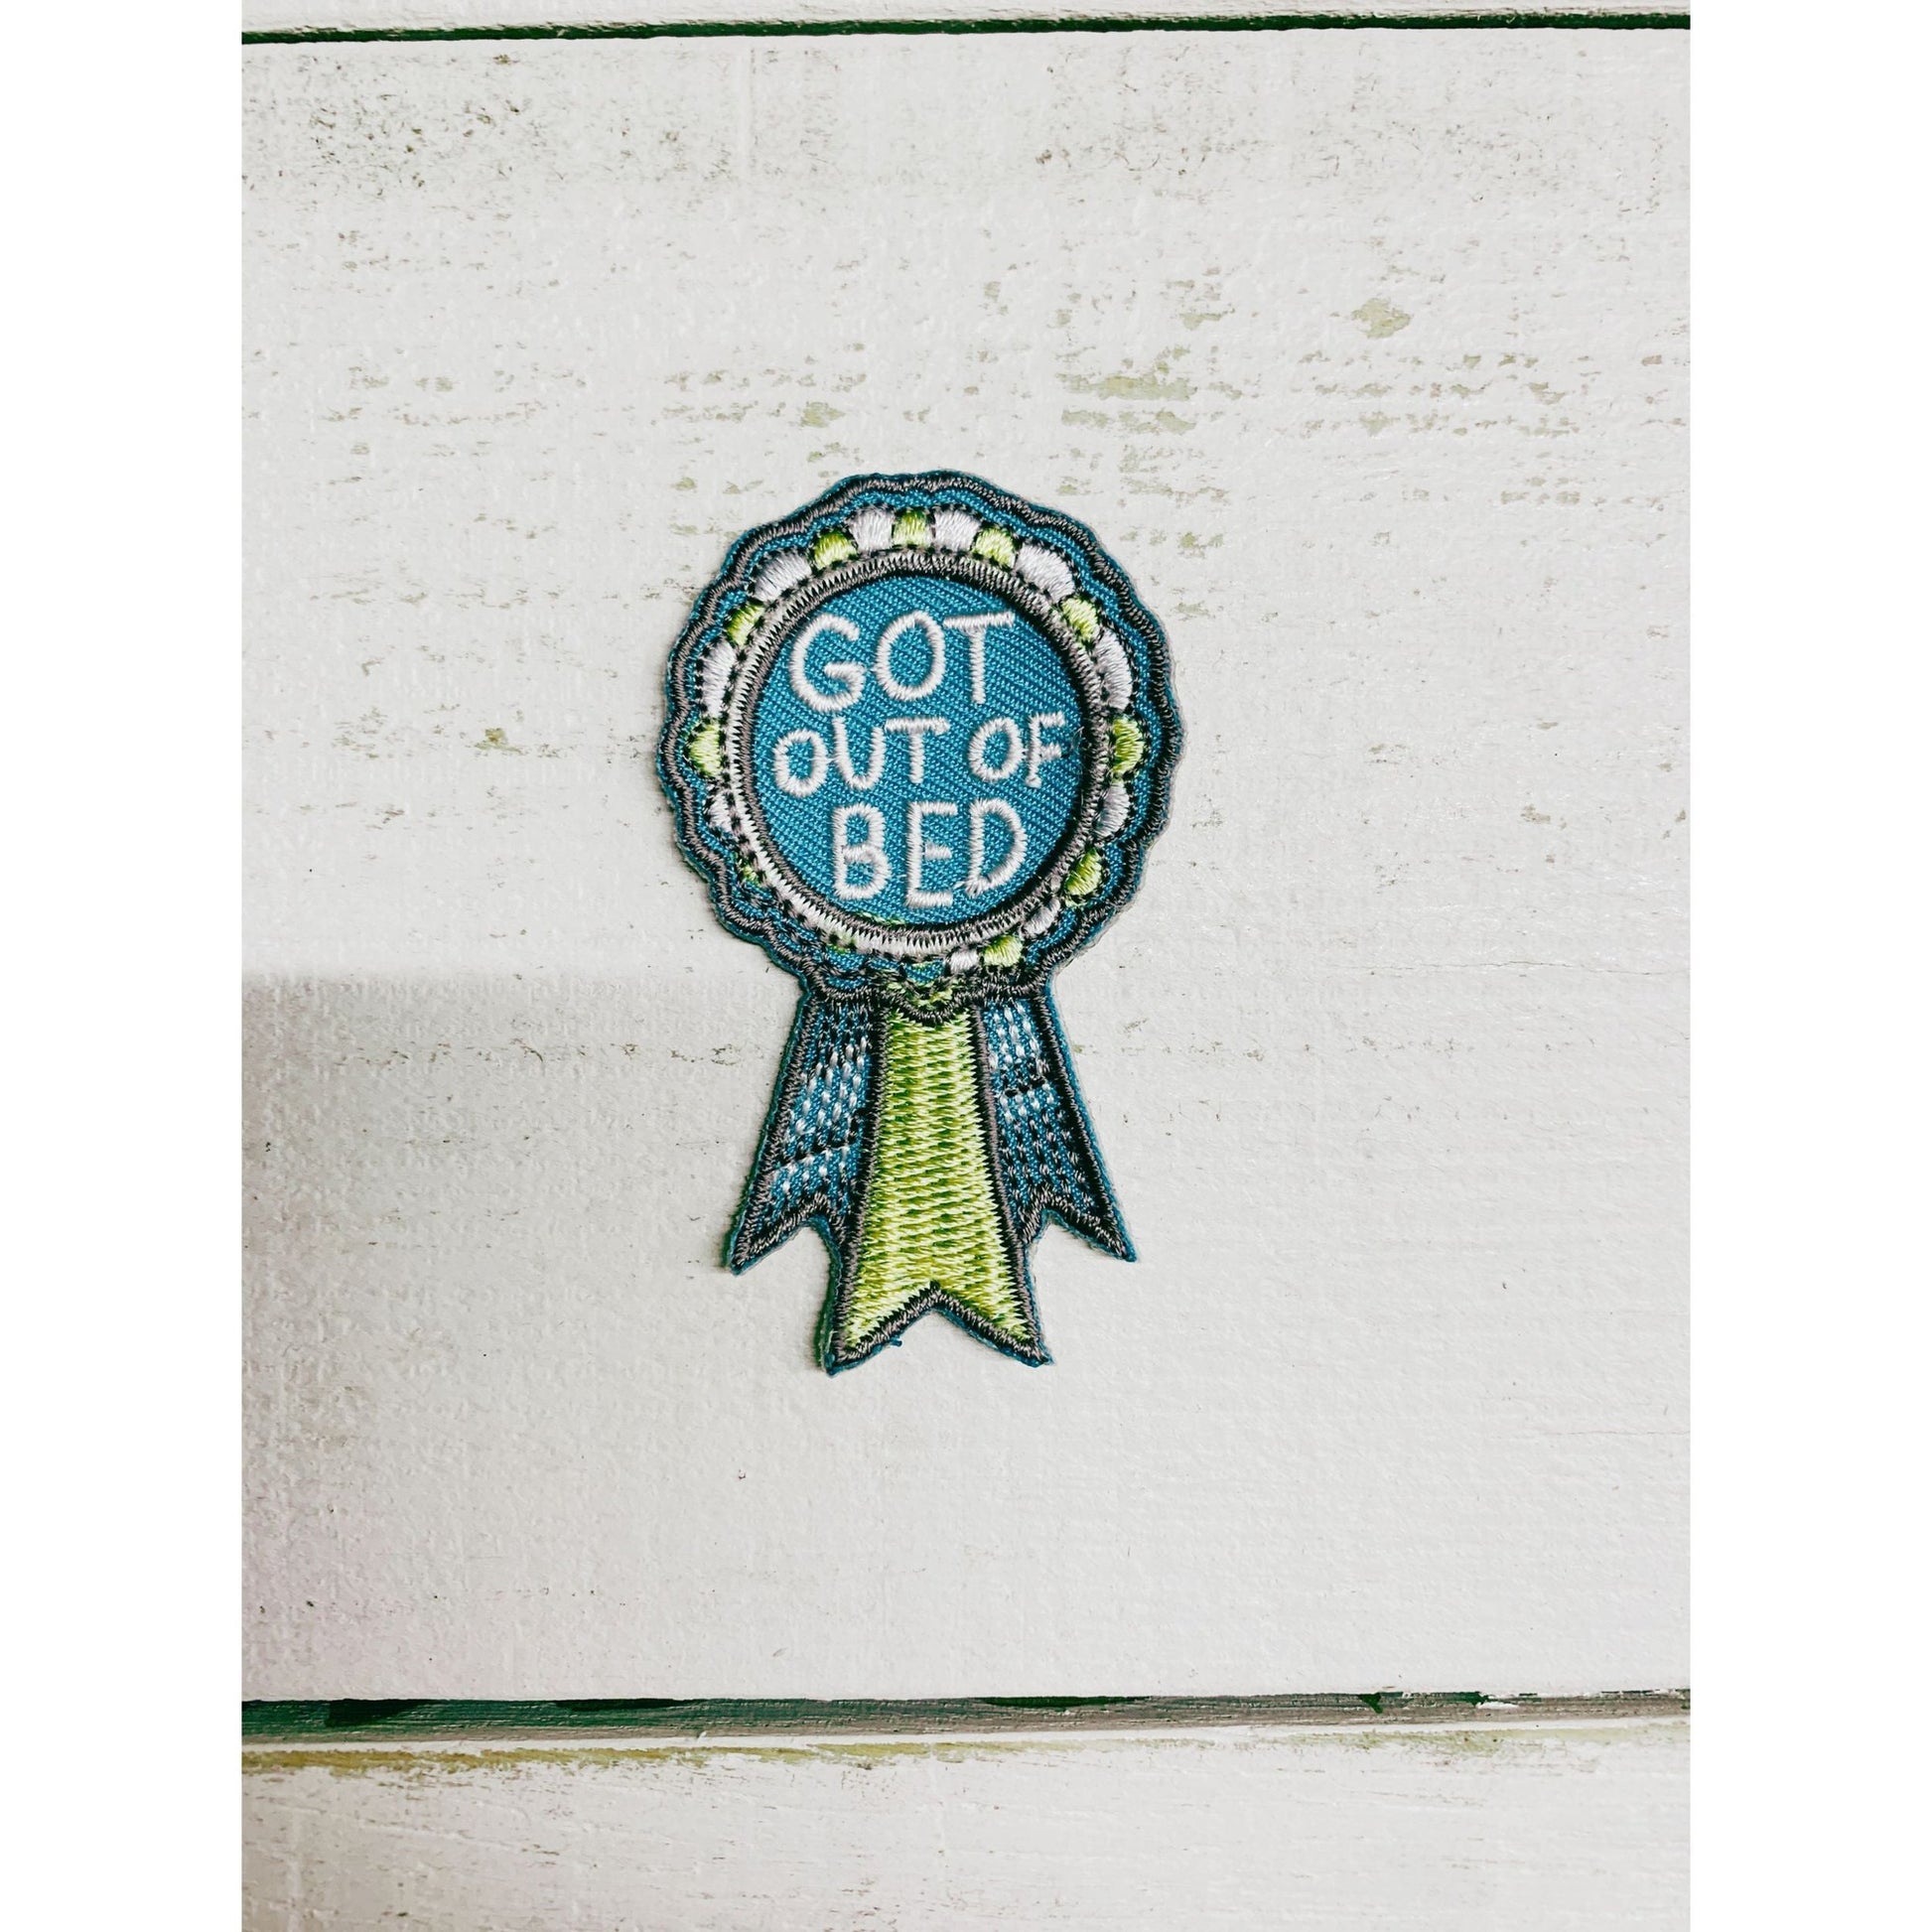 Got Out Of Bed Champion Award No-Sew Patch